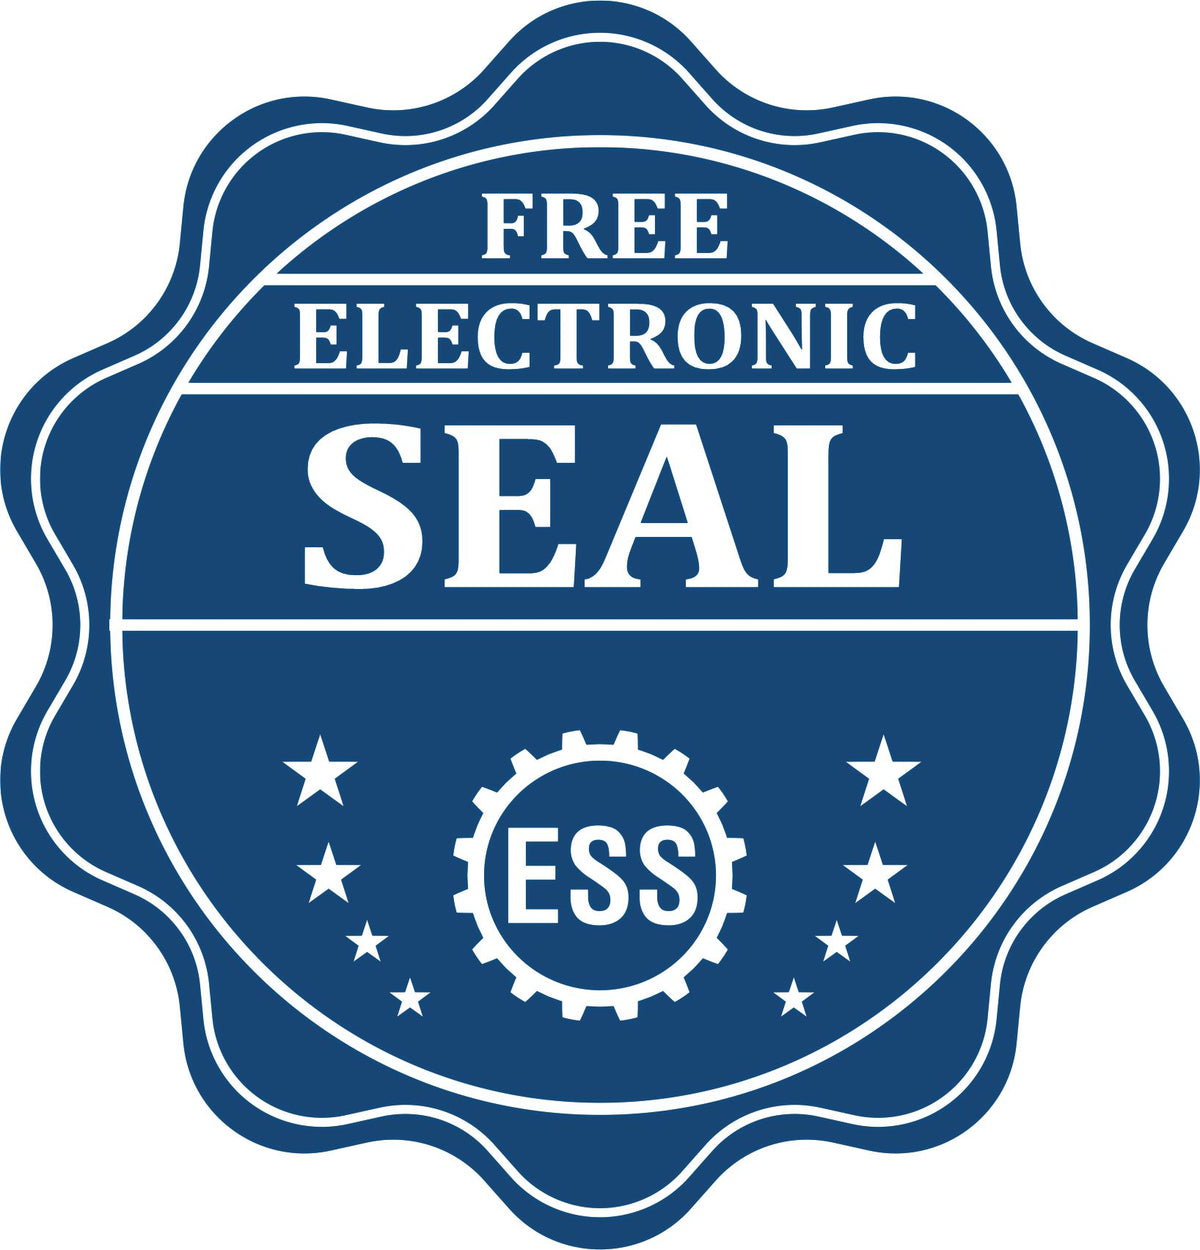 A badge showing a free electronic seal for the PSI Texas Notary Stamp with stars and the ESS gear on the emblem.